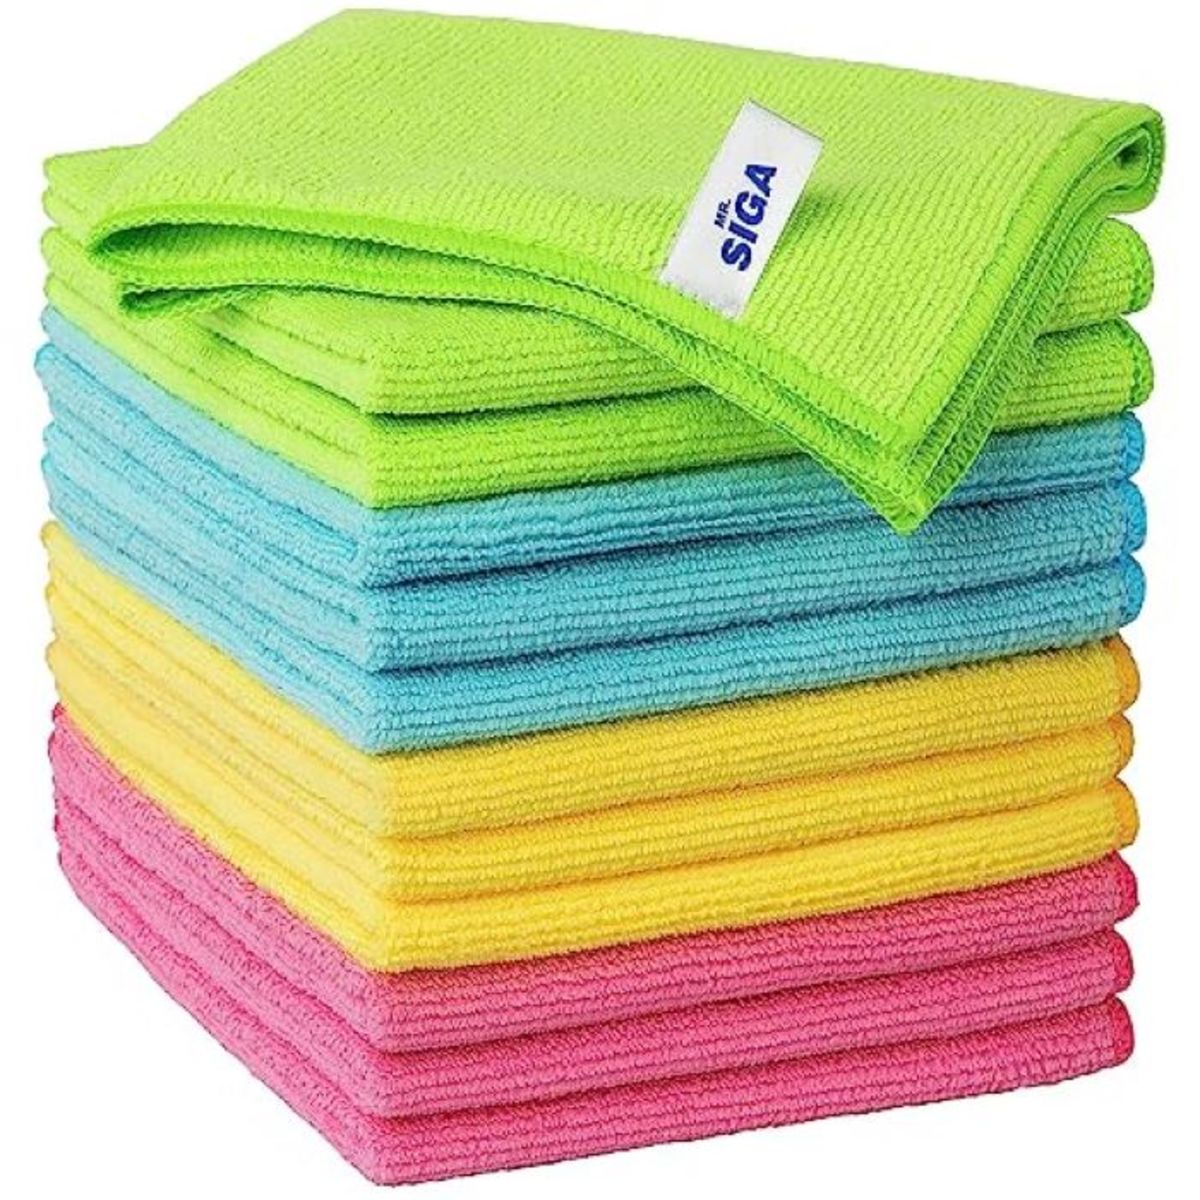 Bestselling Microfiber Towels Cost Just $1 Apiece at Amazon - TheStreet